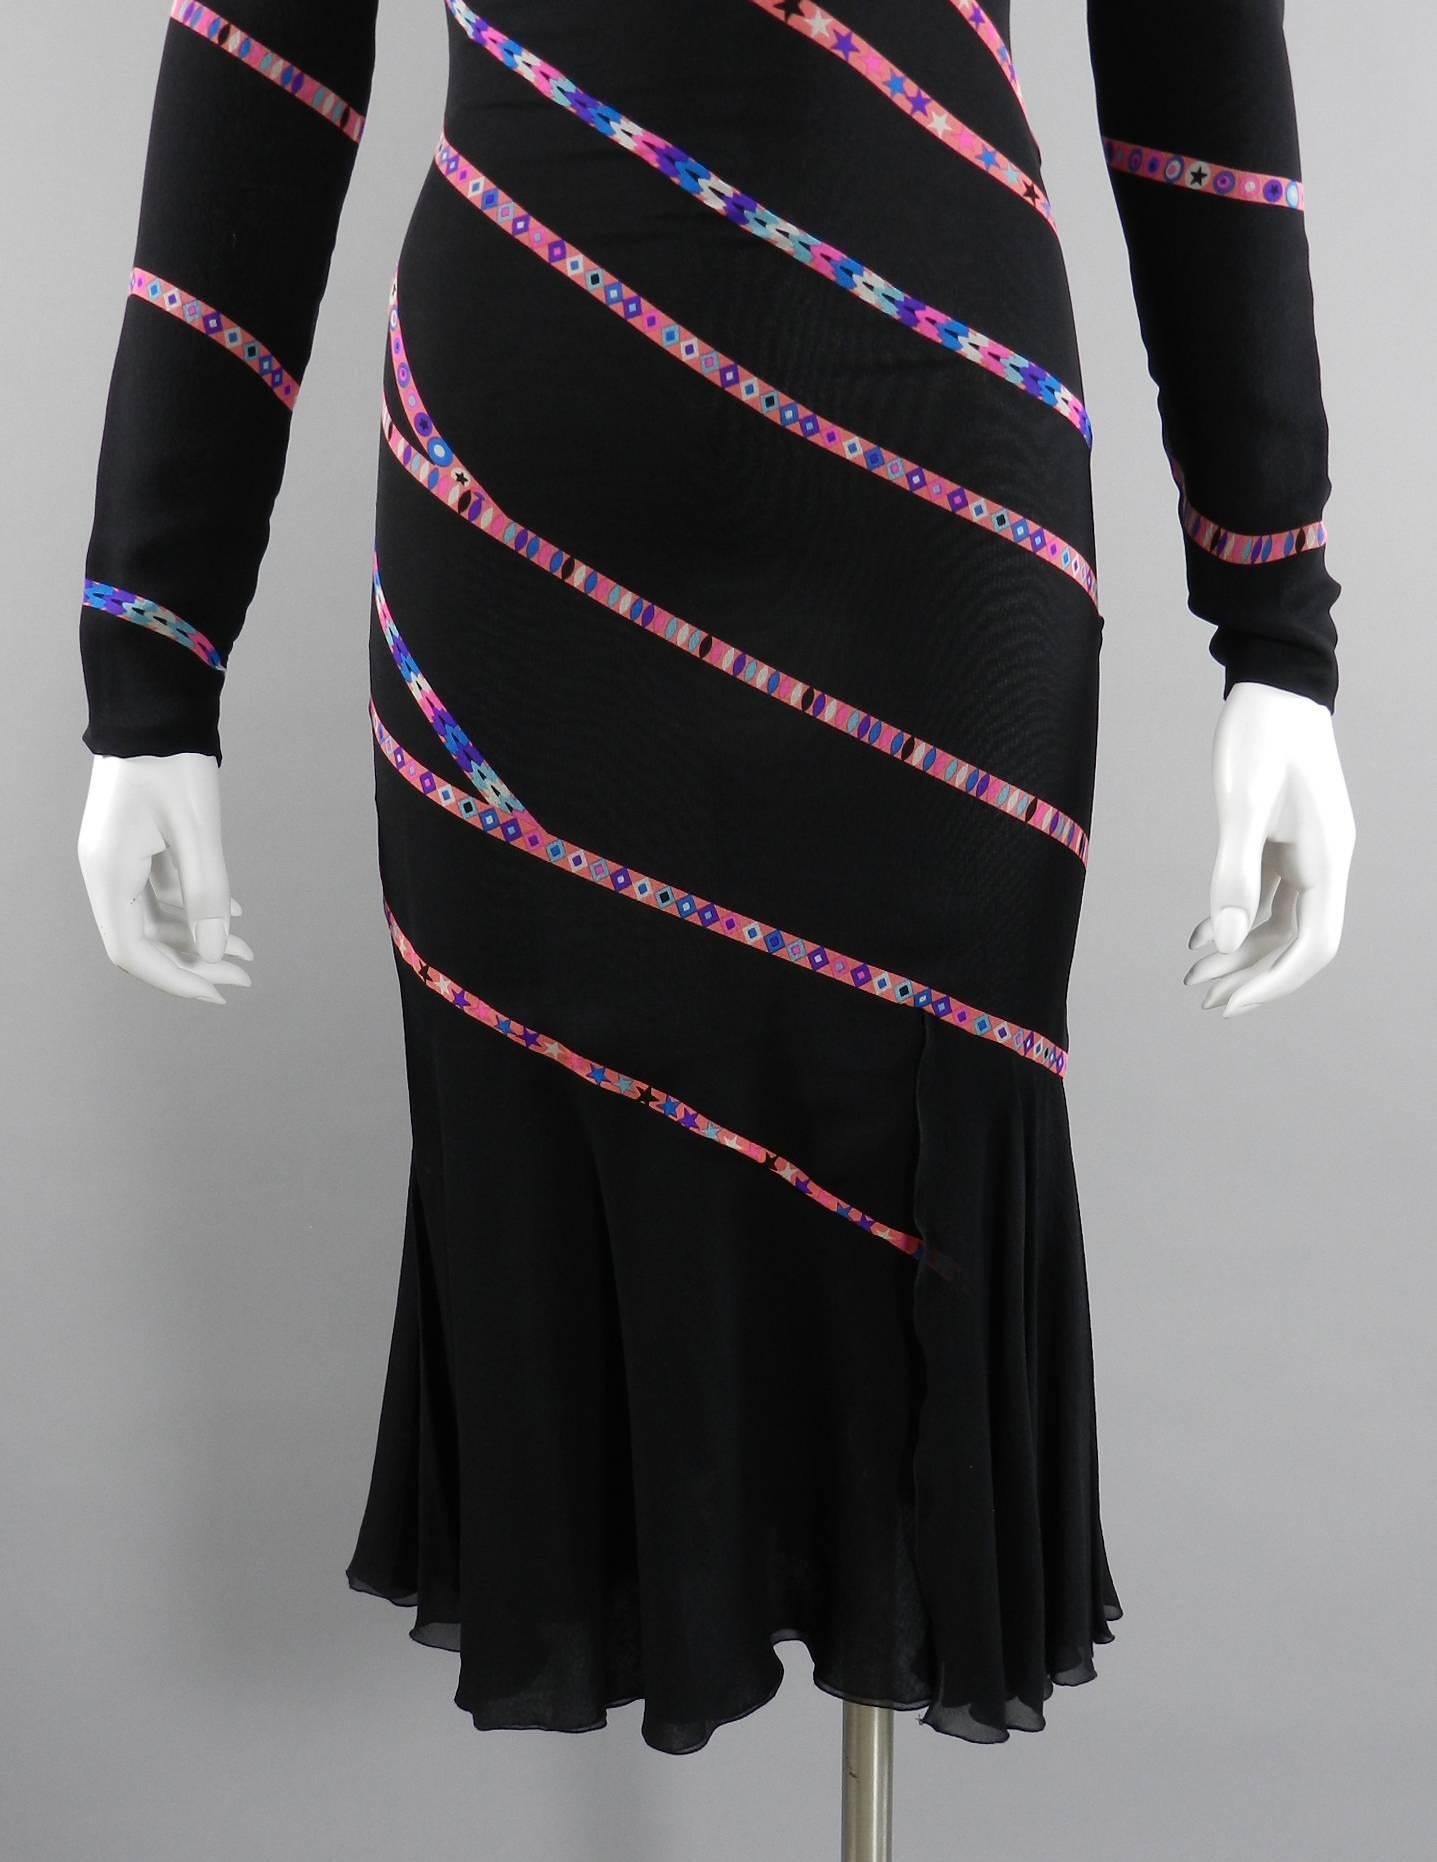 Gianni Versace 1990's Black and Pink Silk Dress with Stars For Sale 3